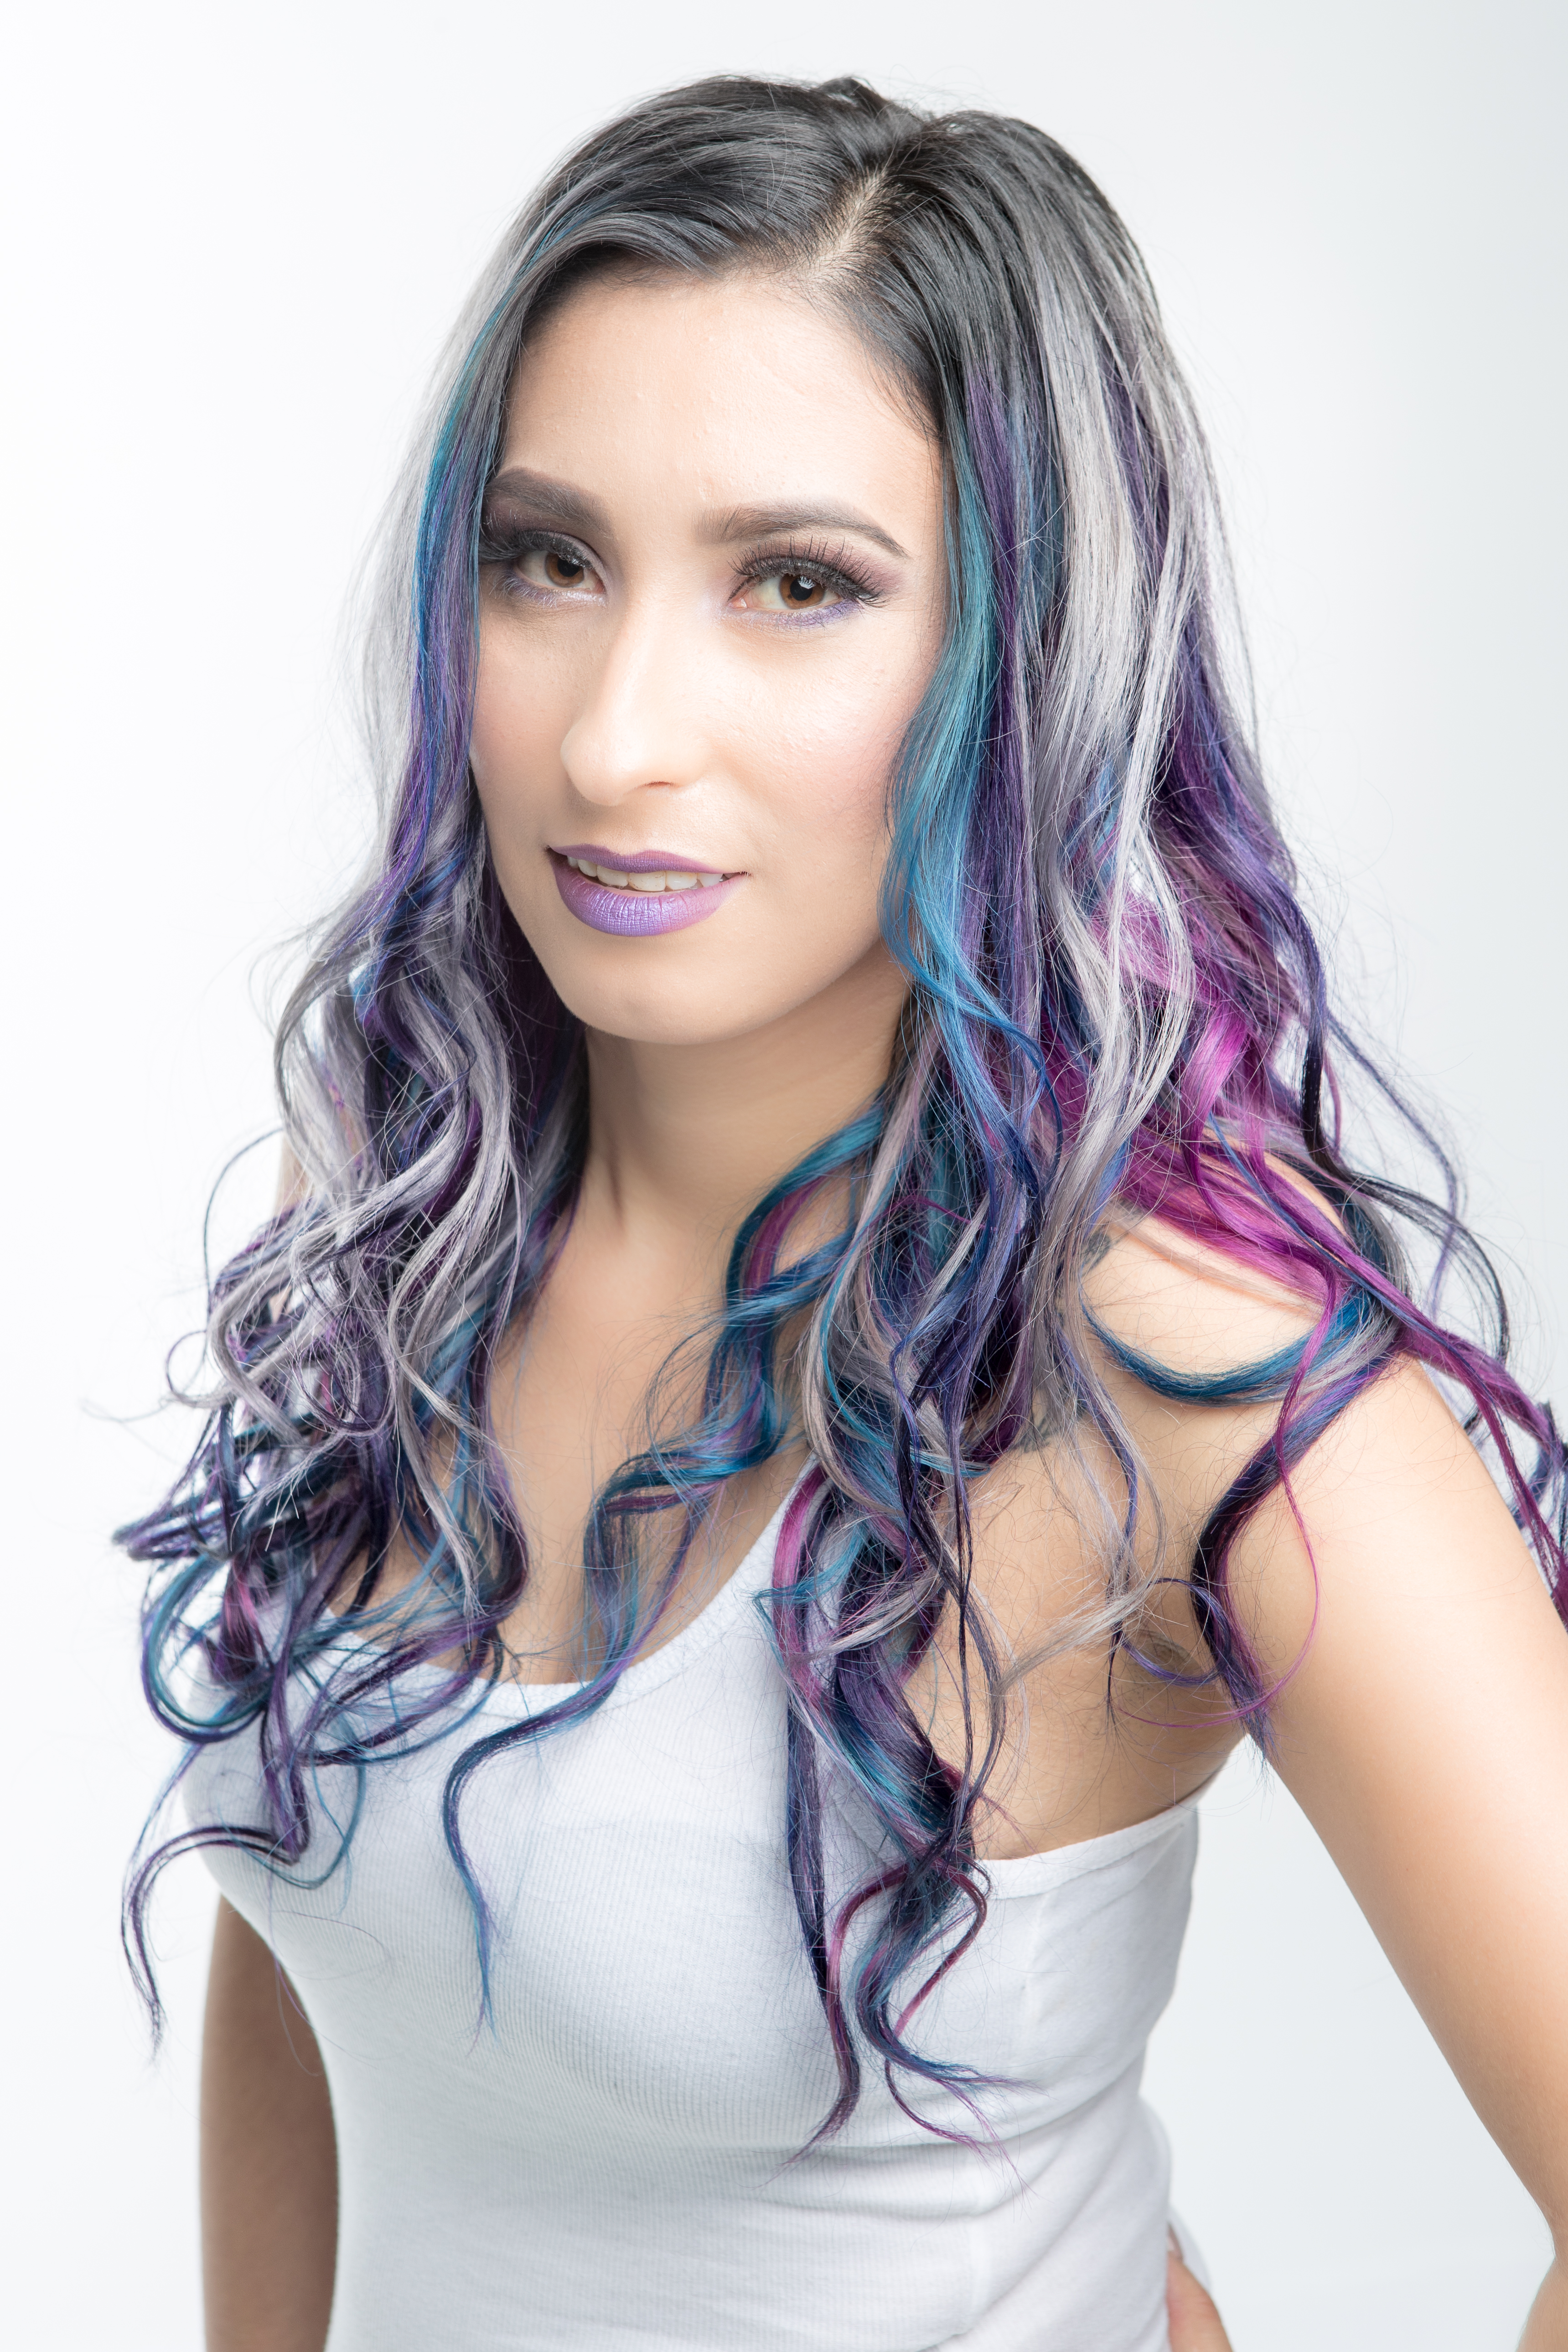 Front view of a long hair style. Hair is mostly silver with blue and purple streaks mixed at the ends.